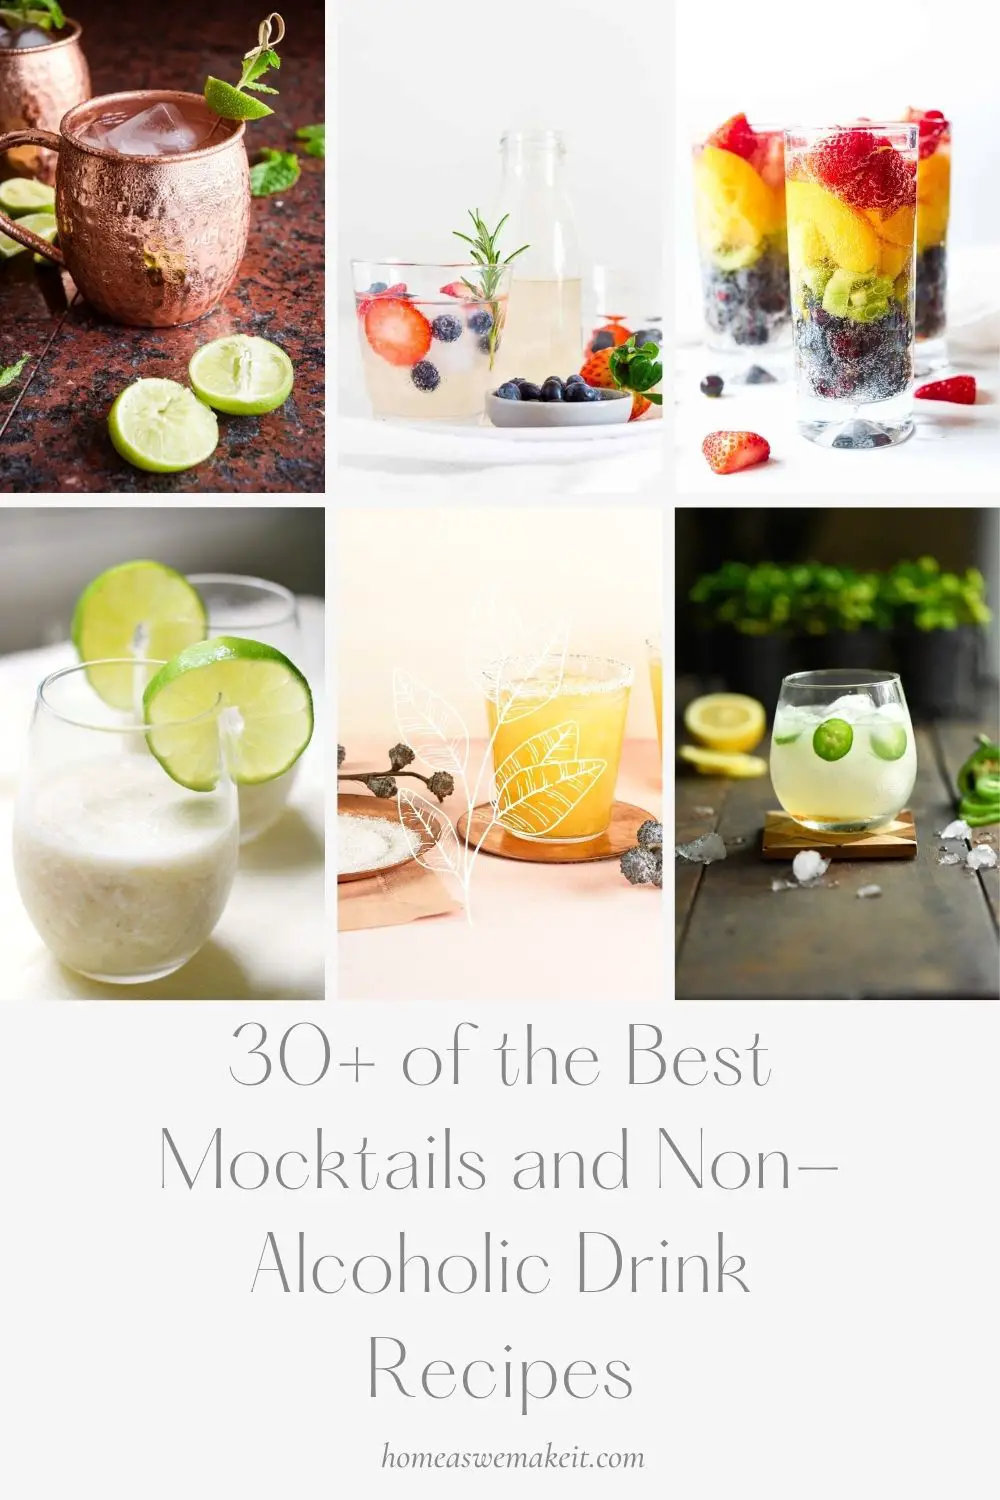 30+ of the best mocktail recipes and ideas for non-alcoholic drinks